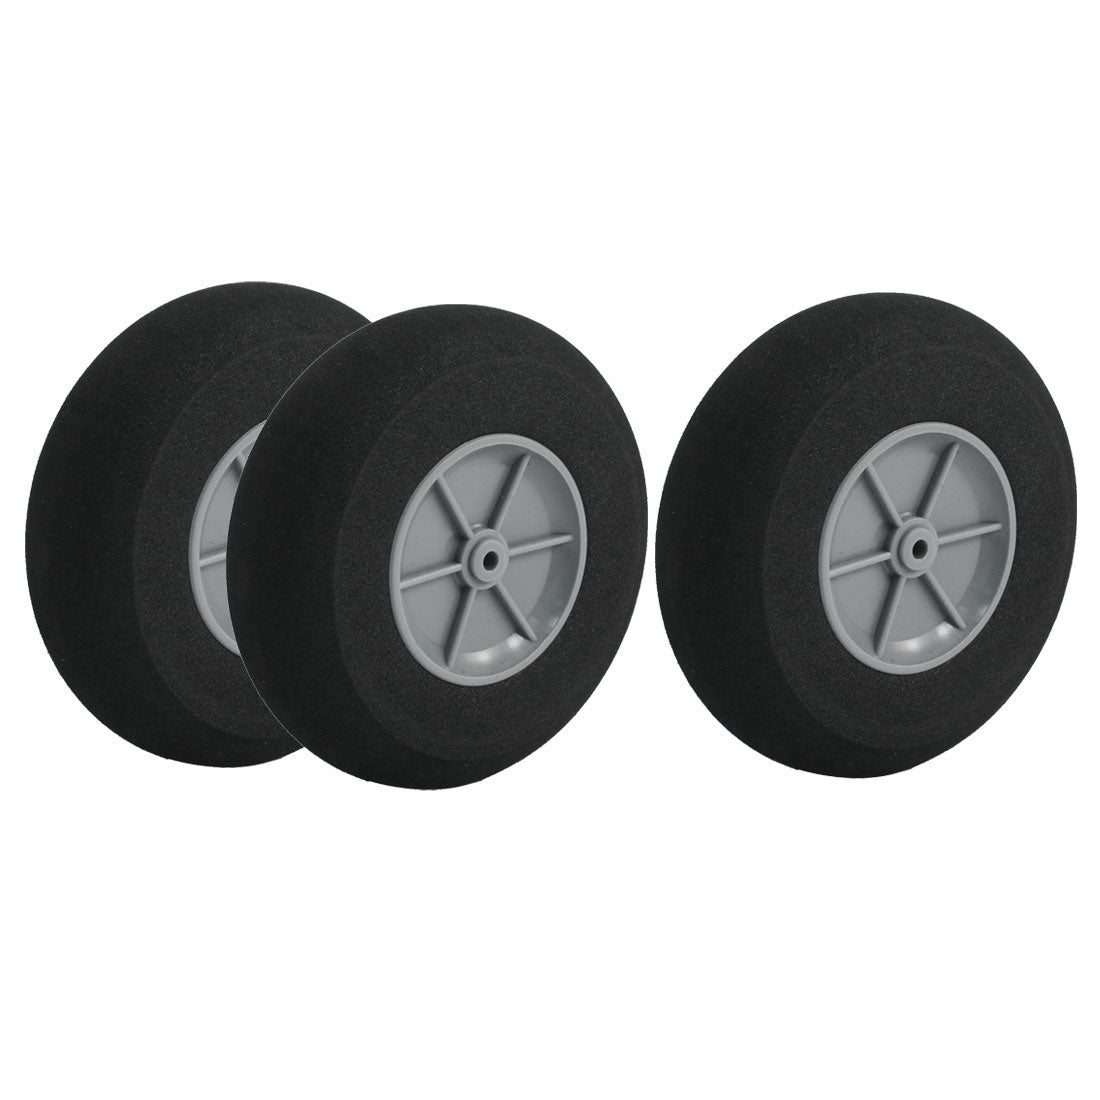 uxcell Uxcell 3pcs RC Airplane Glider Spare Parts Super Light Sponge Wheel 95x30mm